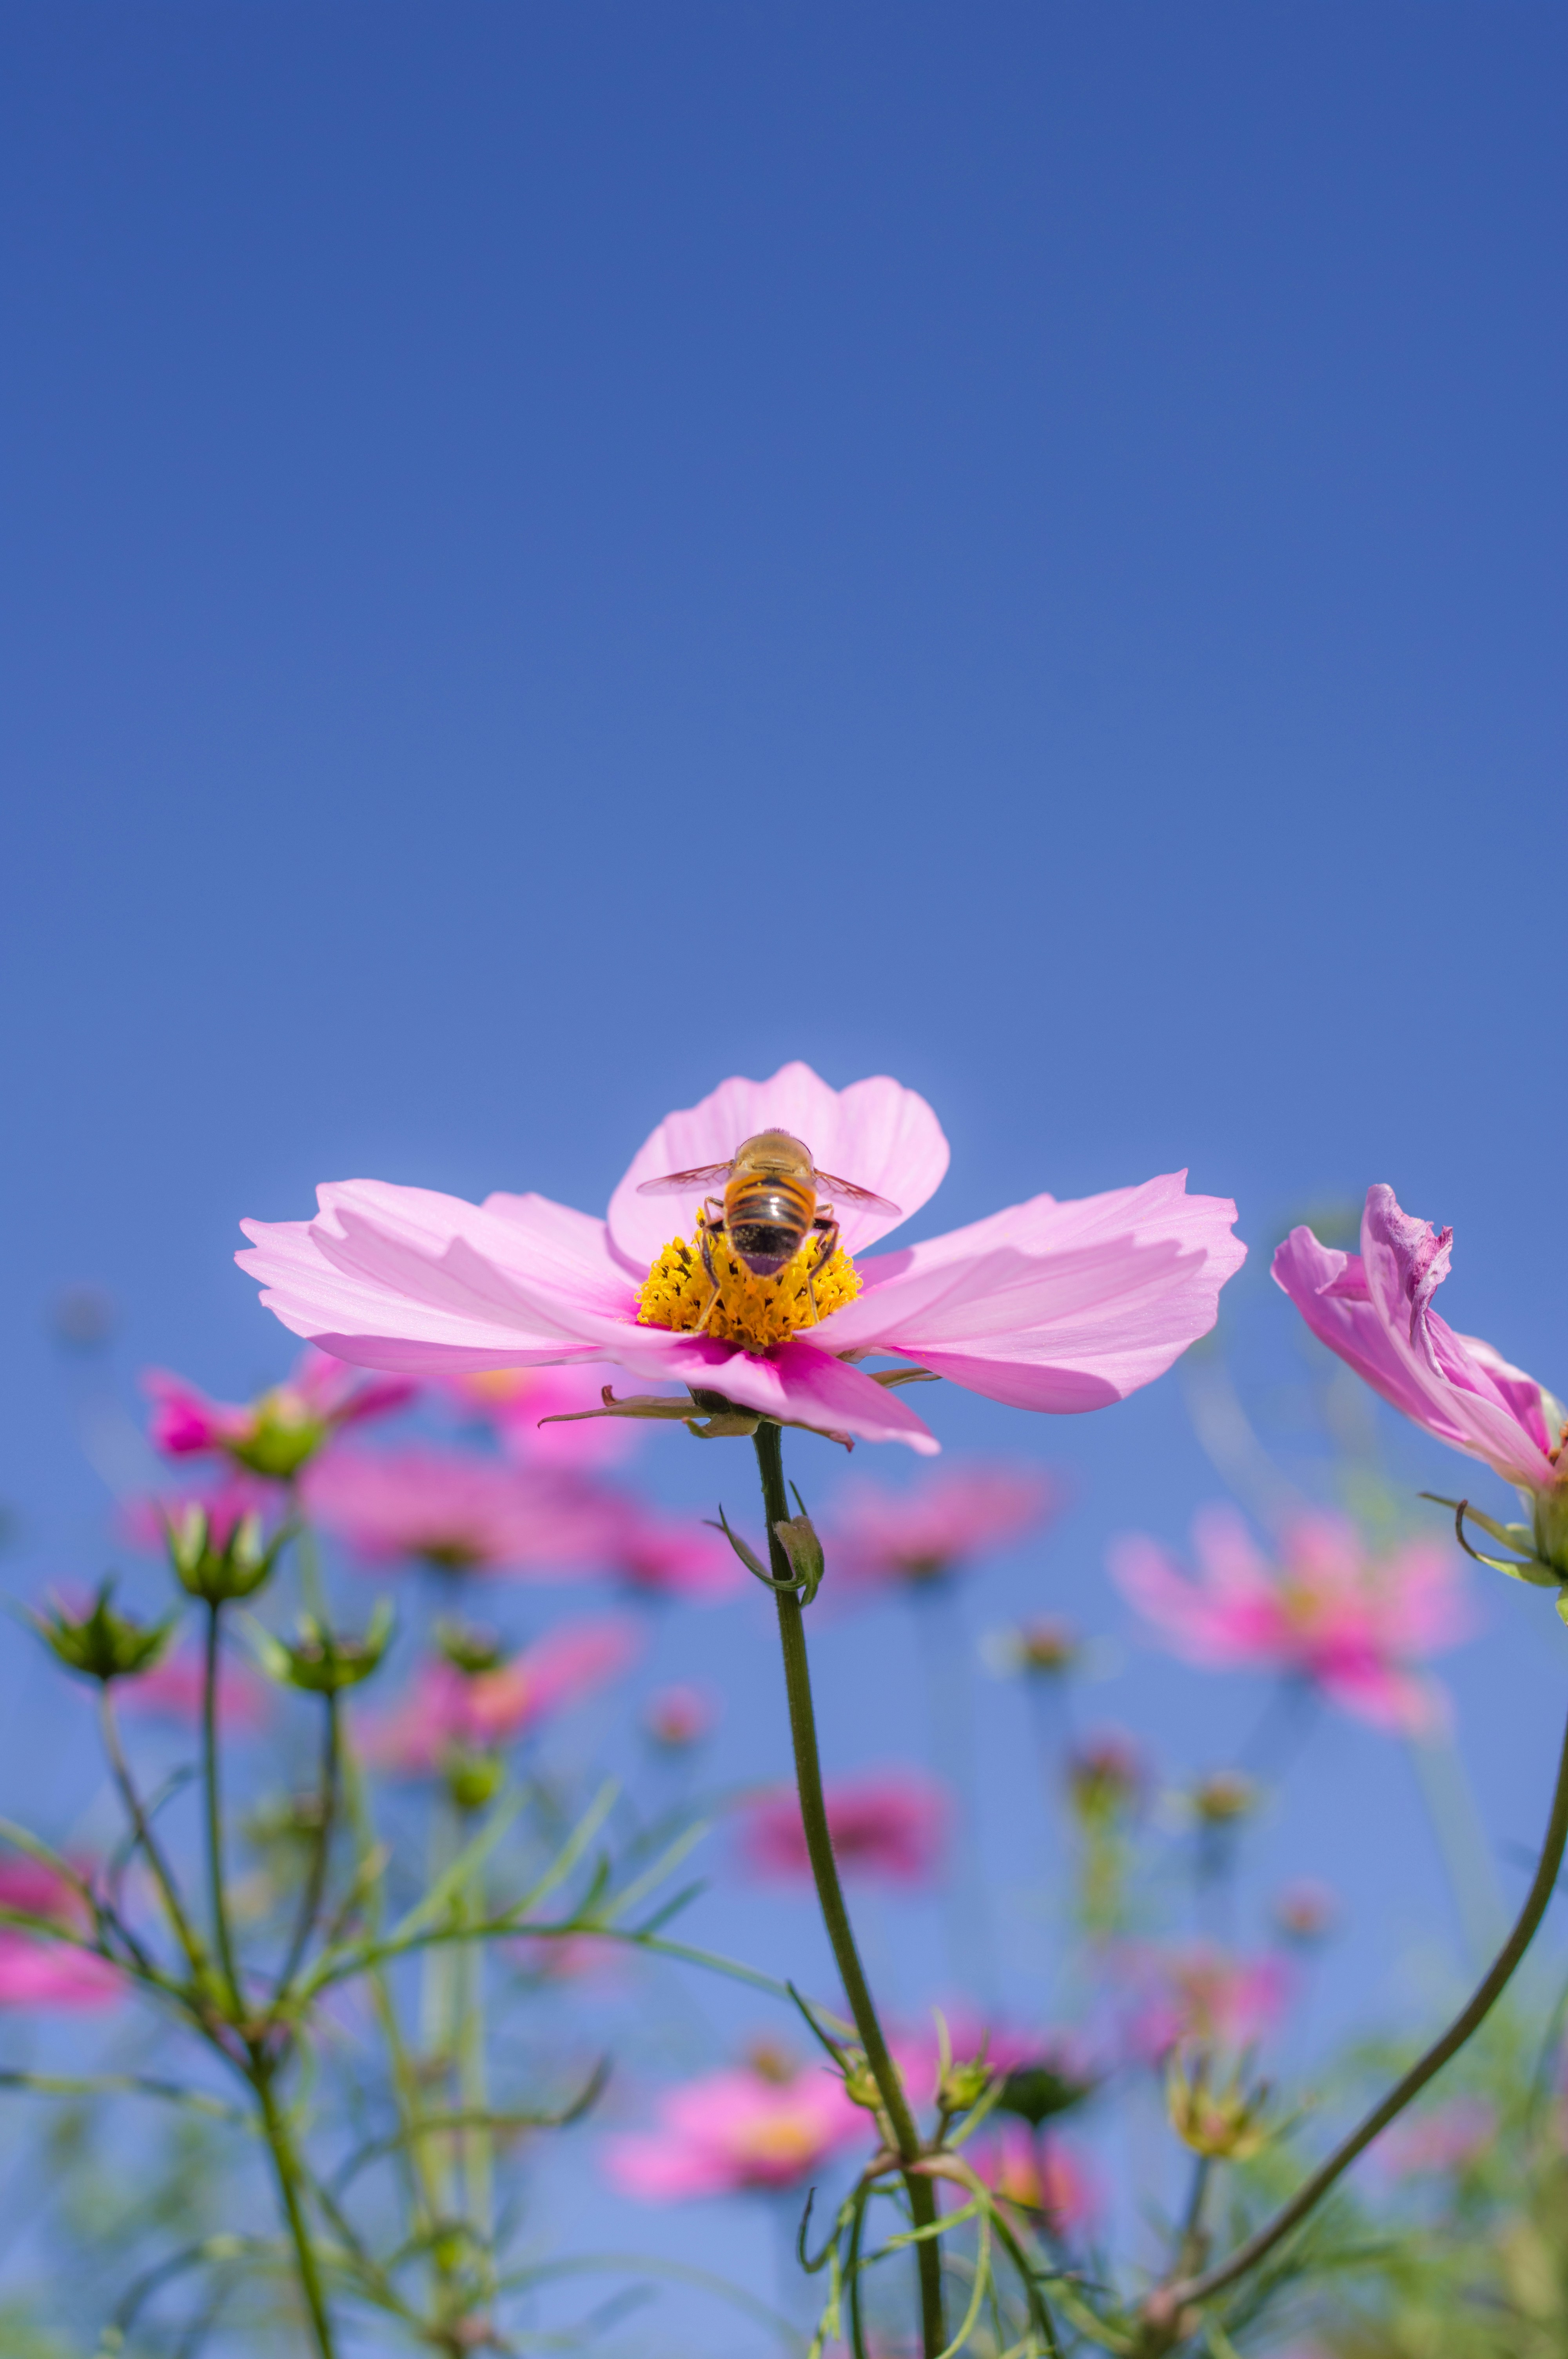 great photo recipe,how to photograph cosmos & honeybee's backside!  it's almost the end of autumn.; pink cosmos flower in bloom during daytime